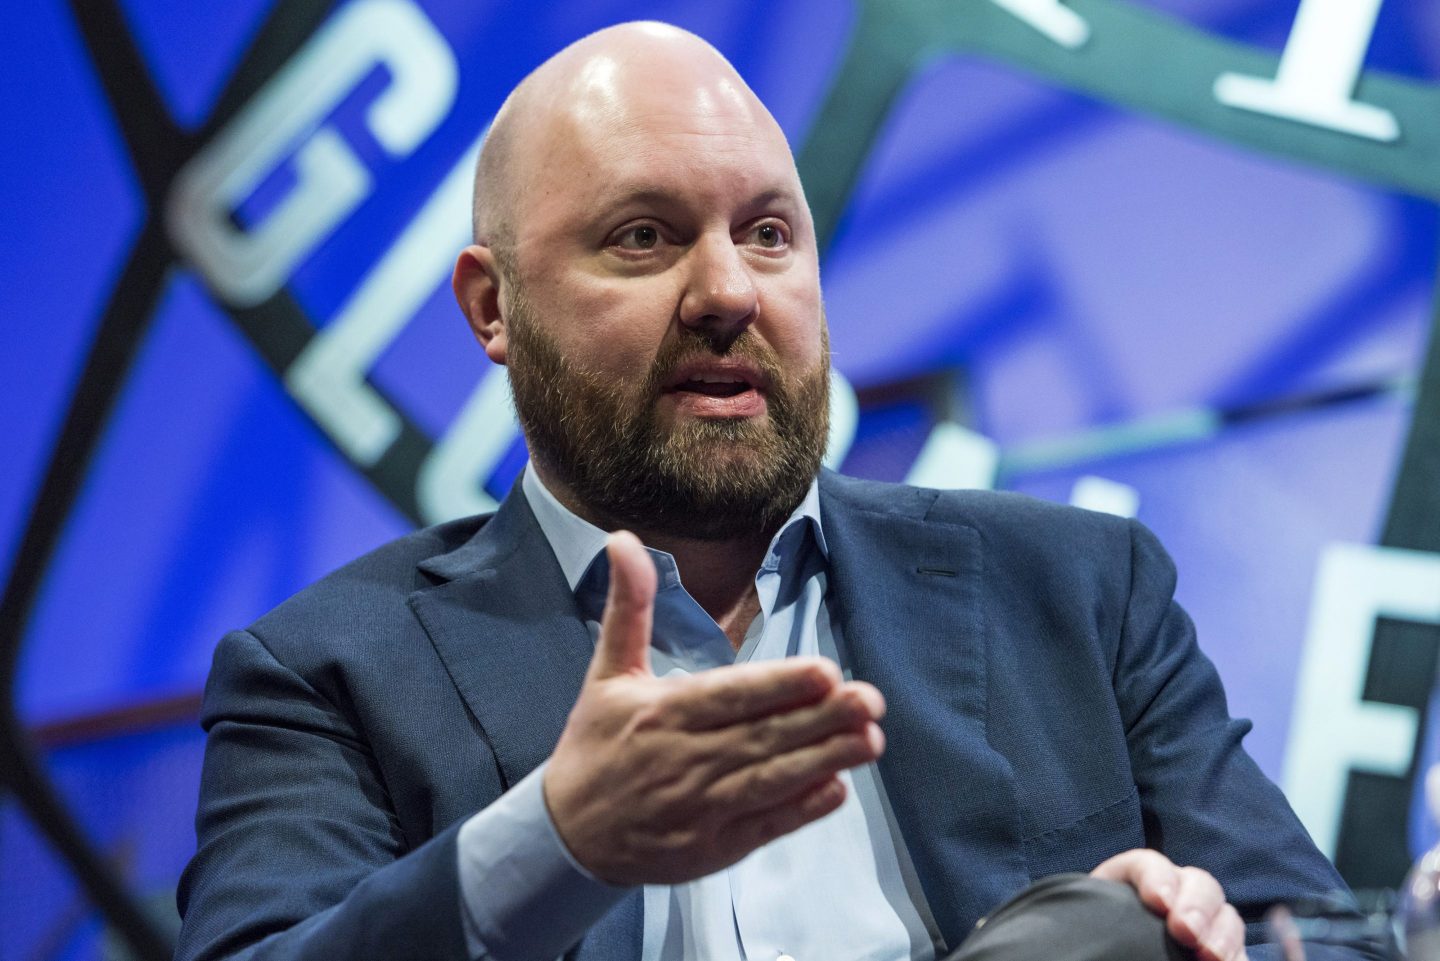 Marc Andreessen, co-founder and general partner of Andreessen Horowitz, speaks during the 2015 Fortune Global Forum in San Francisco, California, U.S., on Tuesday, Nov. 3, 2015. The forum gathers Global 500 CEO&#039;s and innovators, builders, and technologists from some of the most dynamic, emerging companies all over the world to facilitate relationship building at the highest levels. Photographer: David Paul Morris/Bloomberg via Getty Images